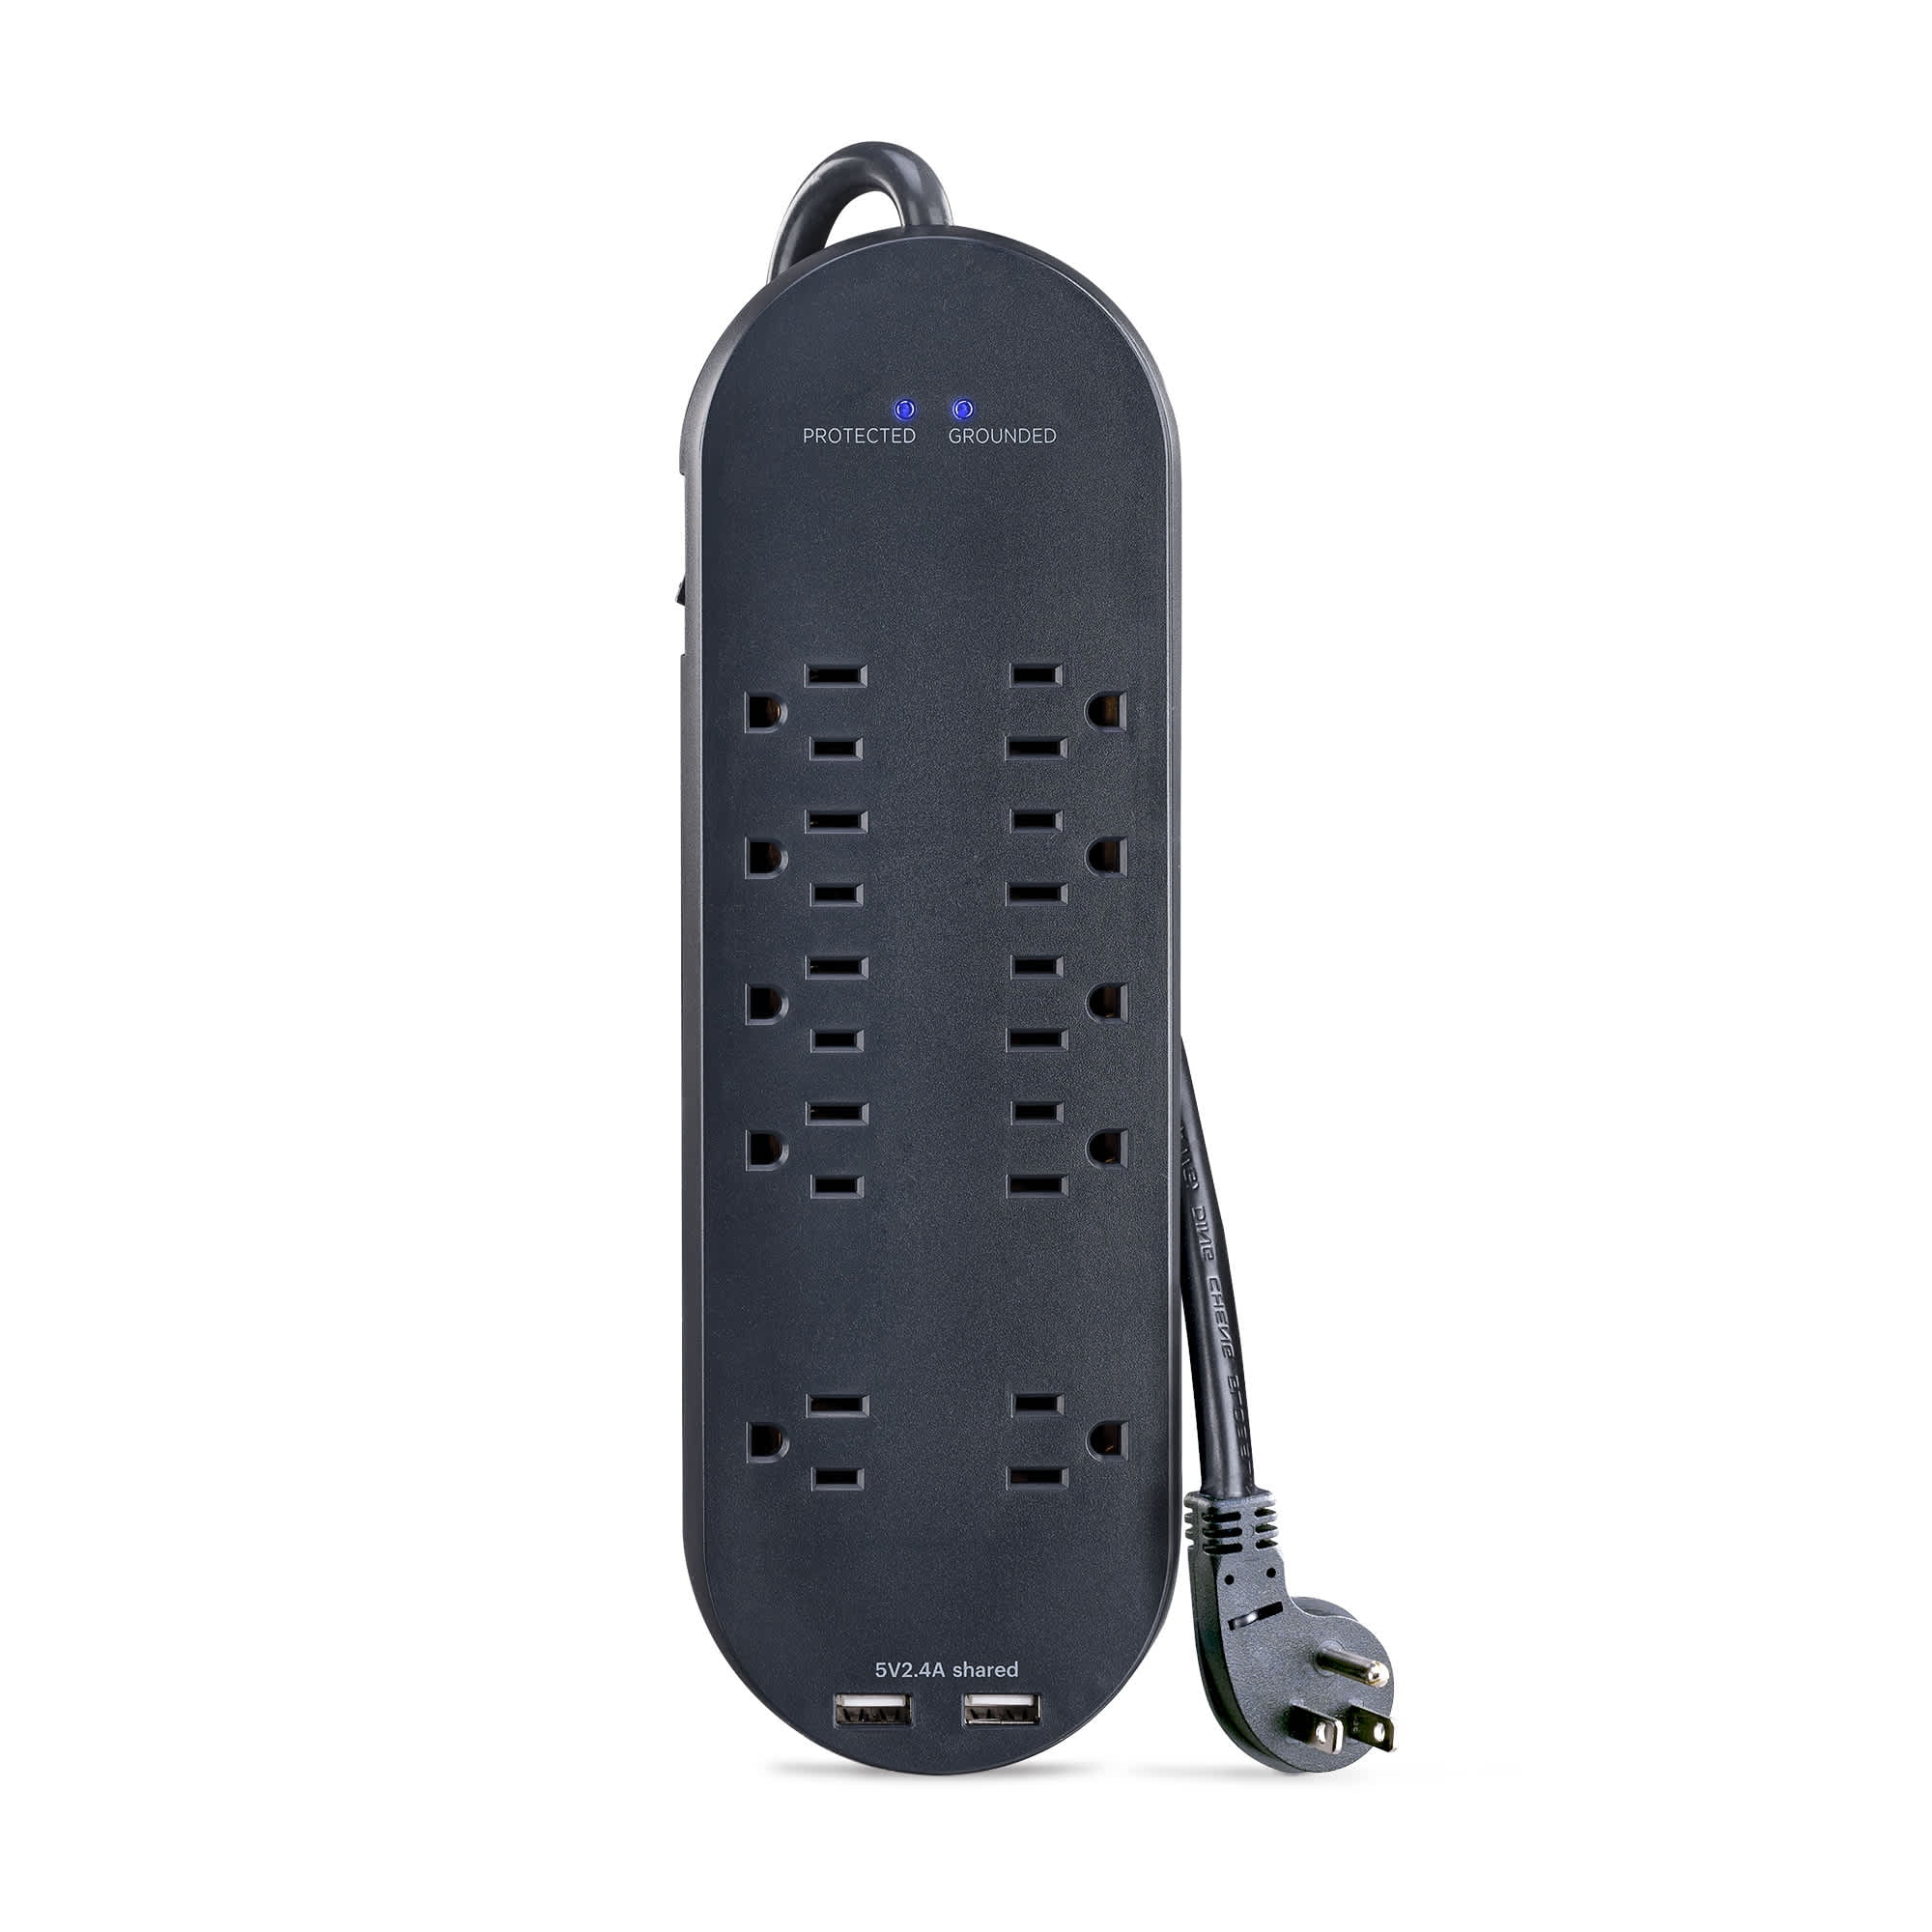 Ge 4 Outlet Surge Protector Power Strip With 2 Usb Ports : Target